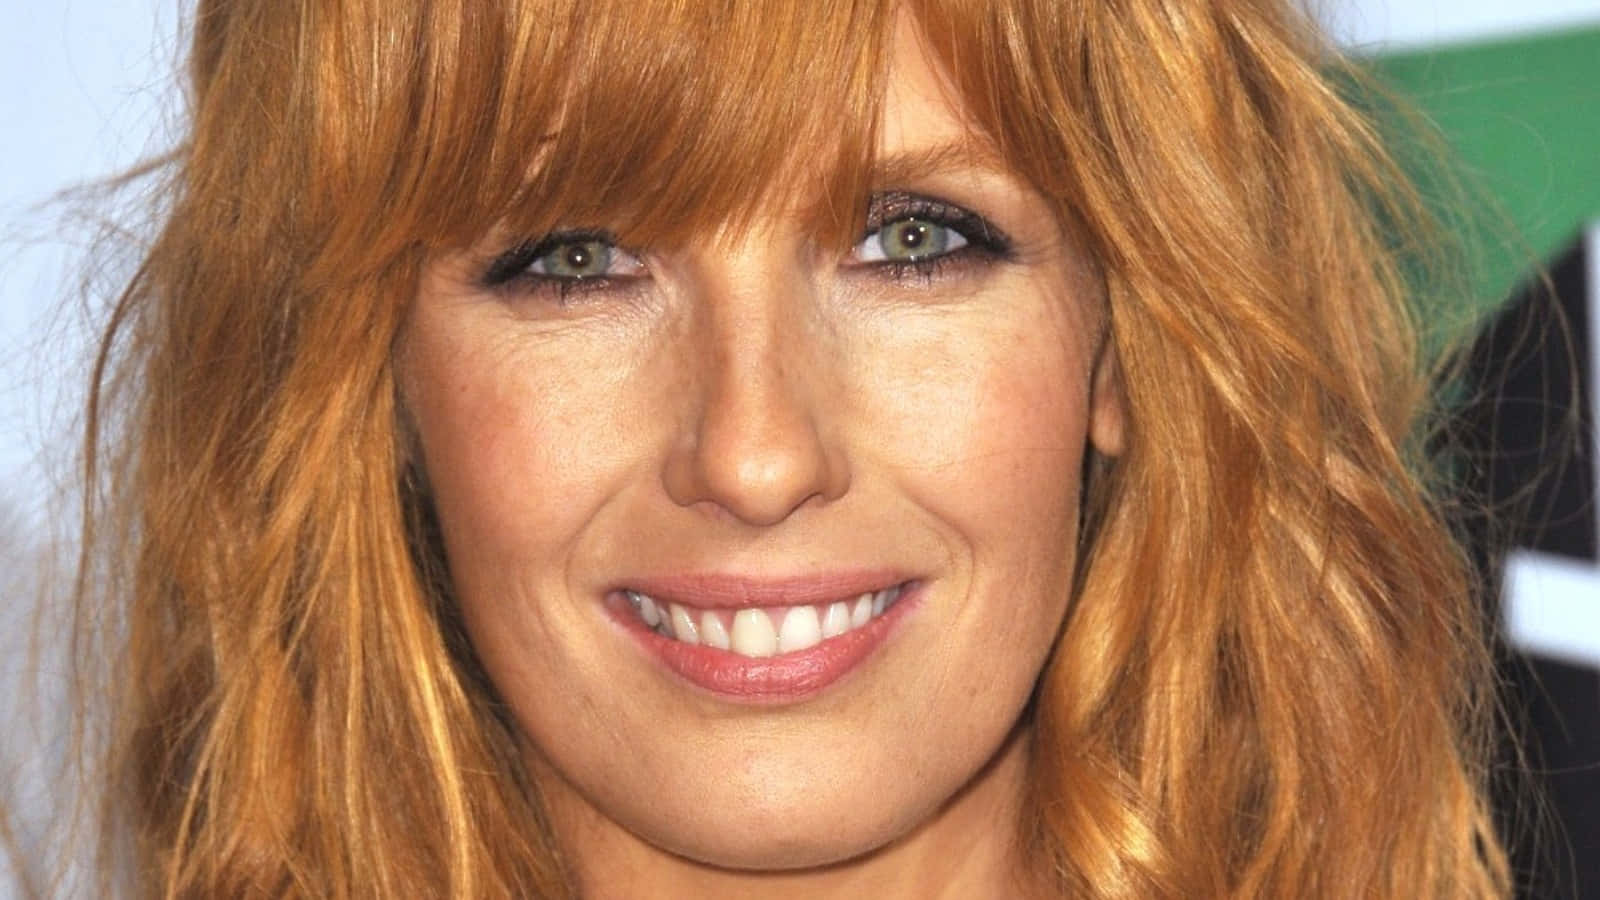 Actress Kelly Reilly attends the Amazon Prime Video Special Event for the Premiere of "Hanna" on March 24, 2019.